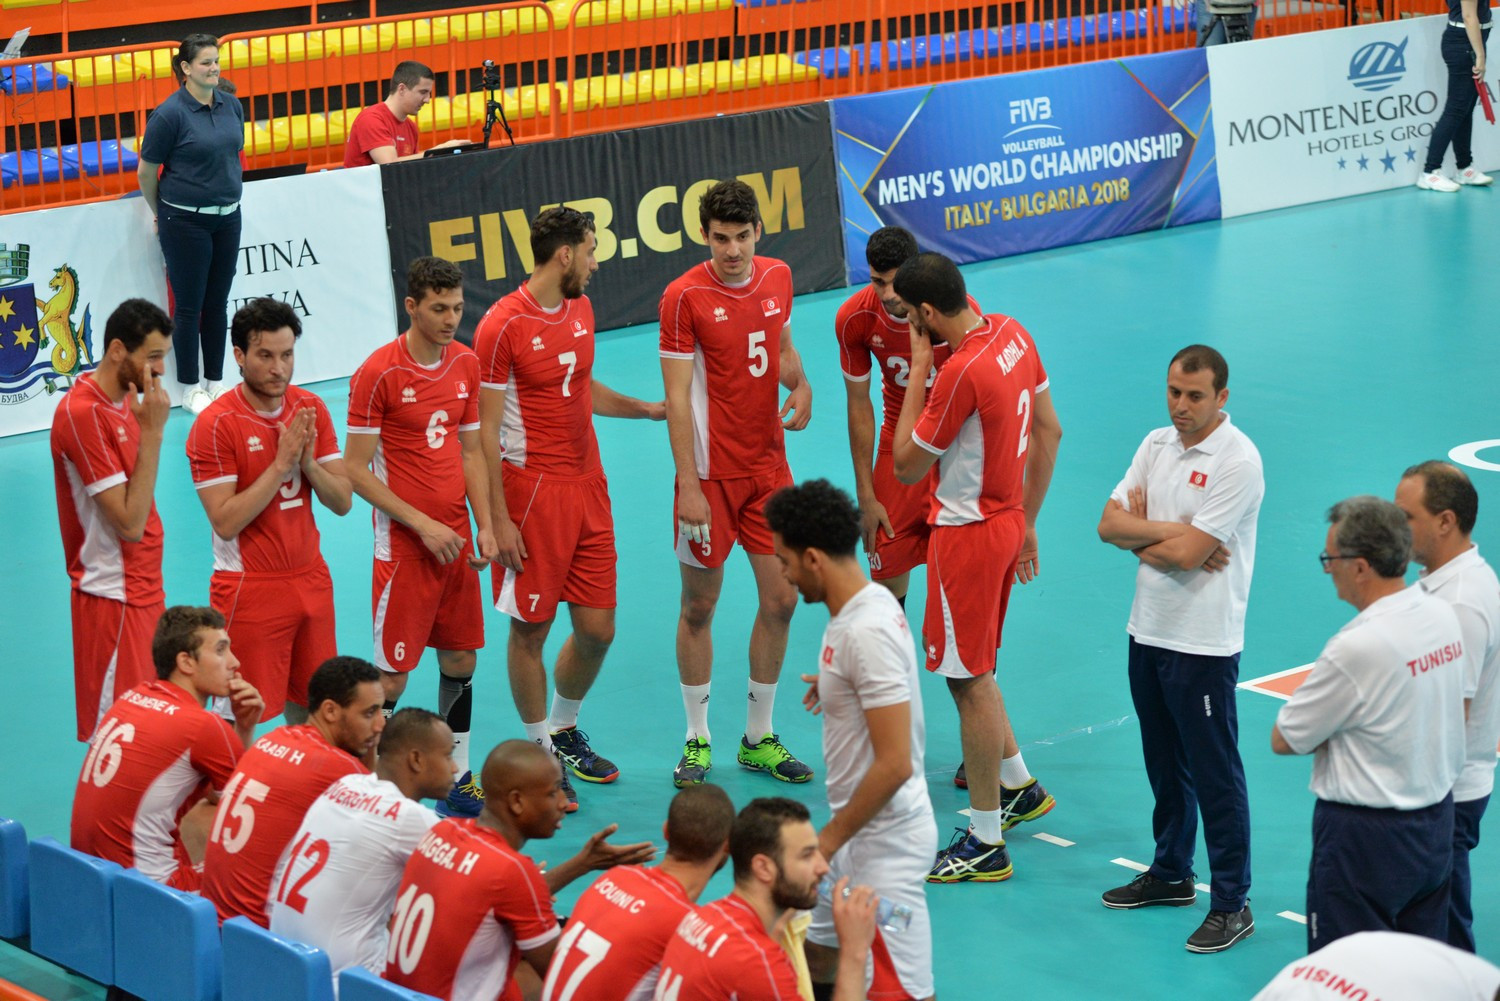 Tunisia bid for 10th title at home African Men's Volleyball Championship